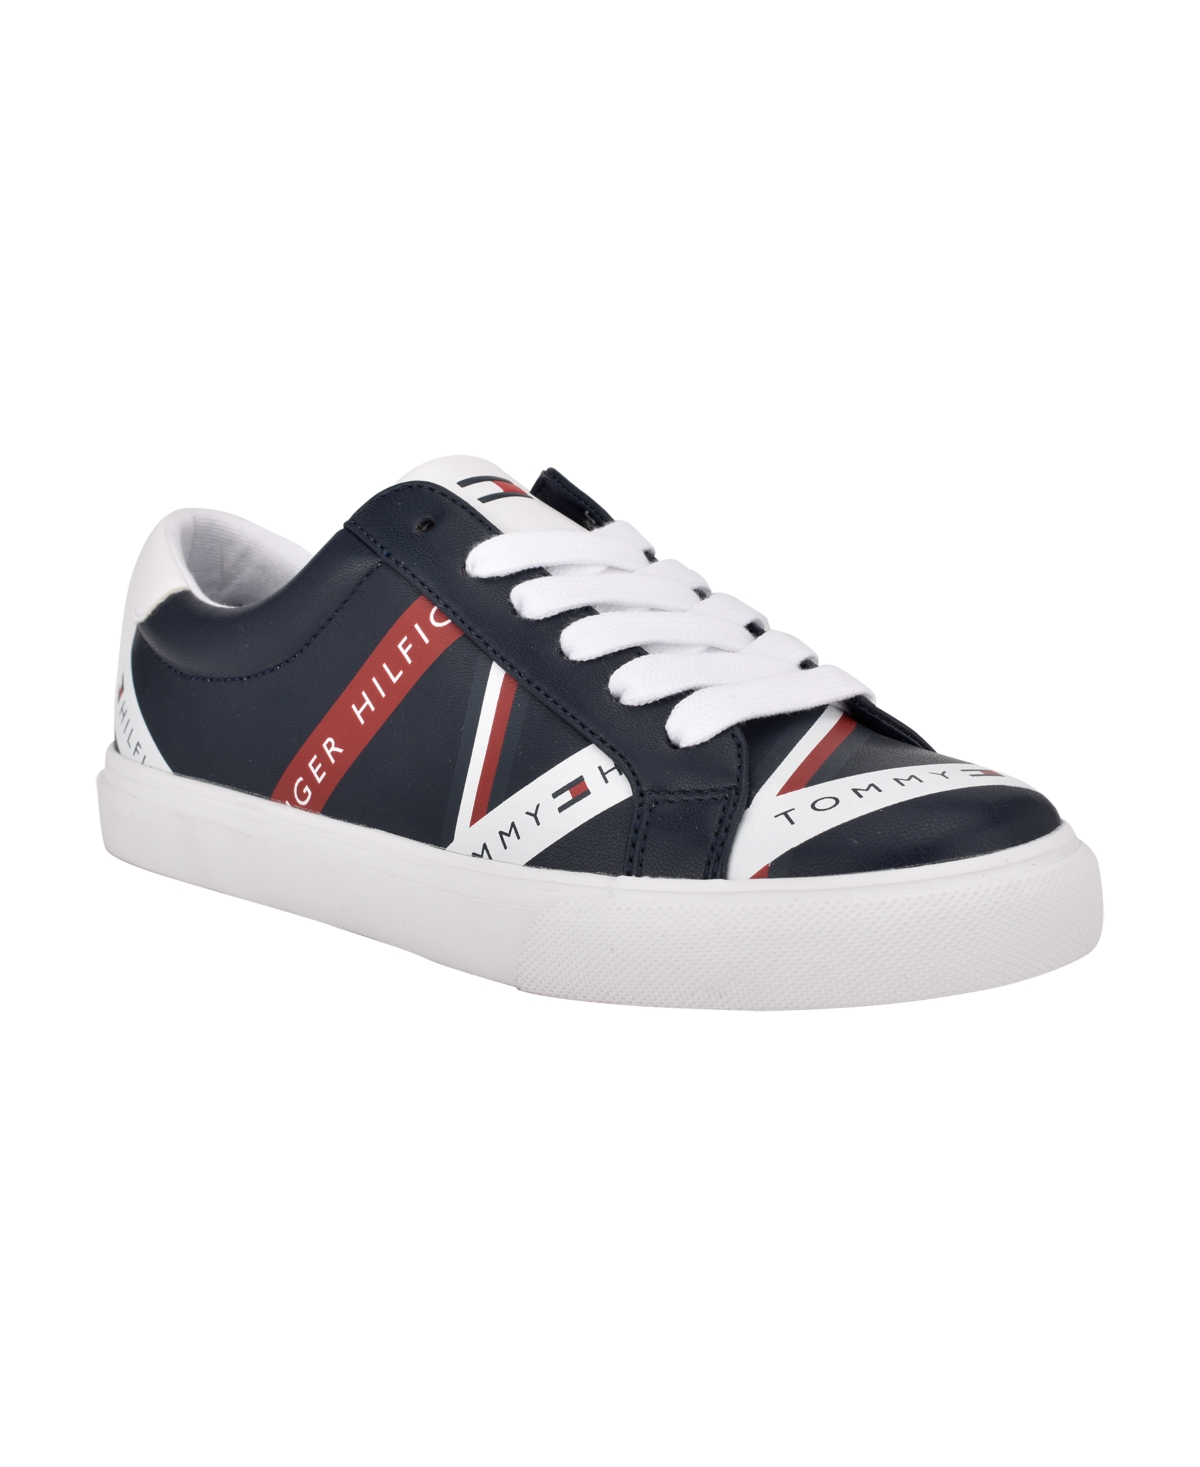 TOMMY HILFIGER LACEN LACE UP SNEAKERS WOMEN'S SHOES